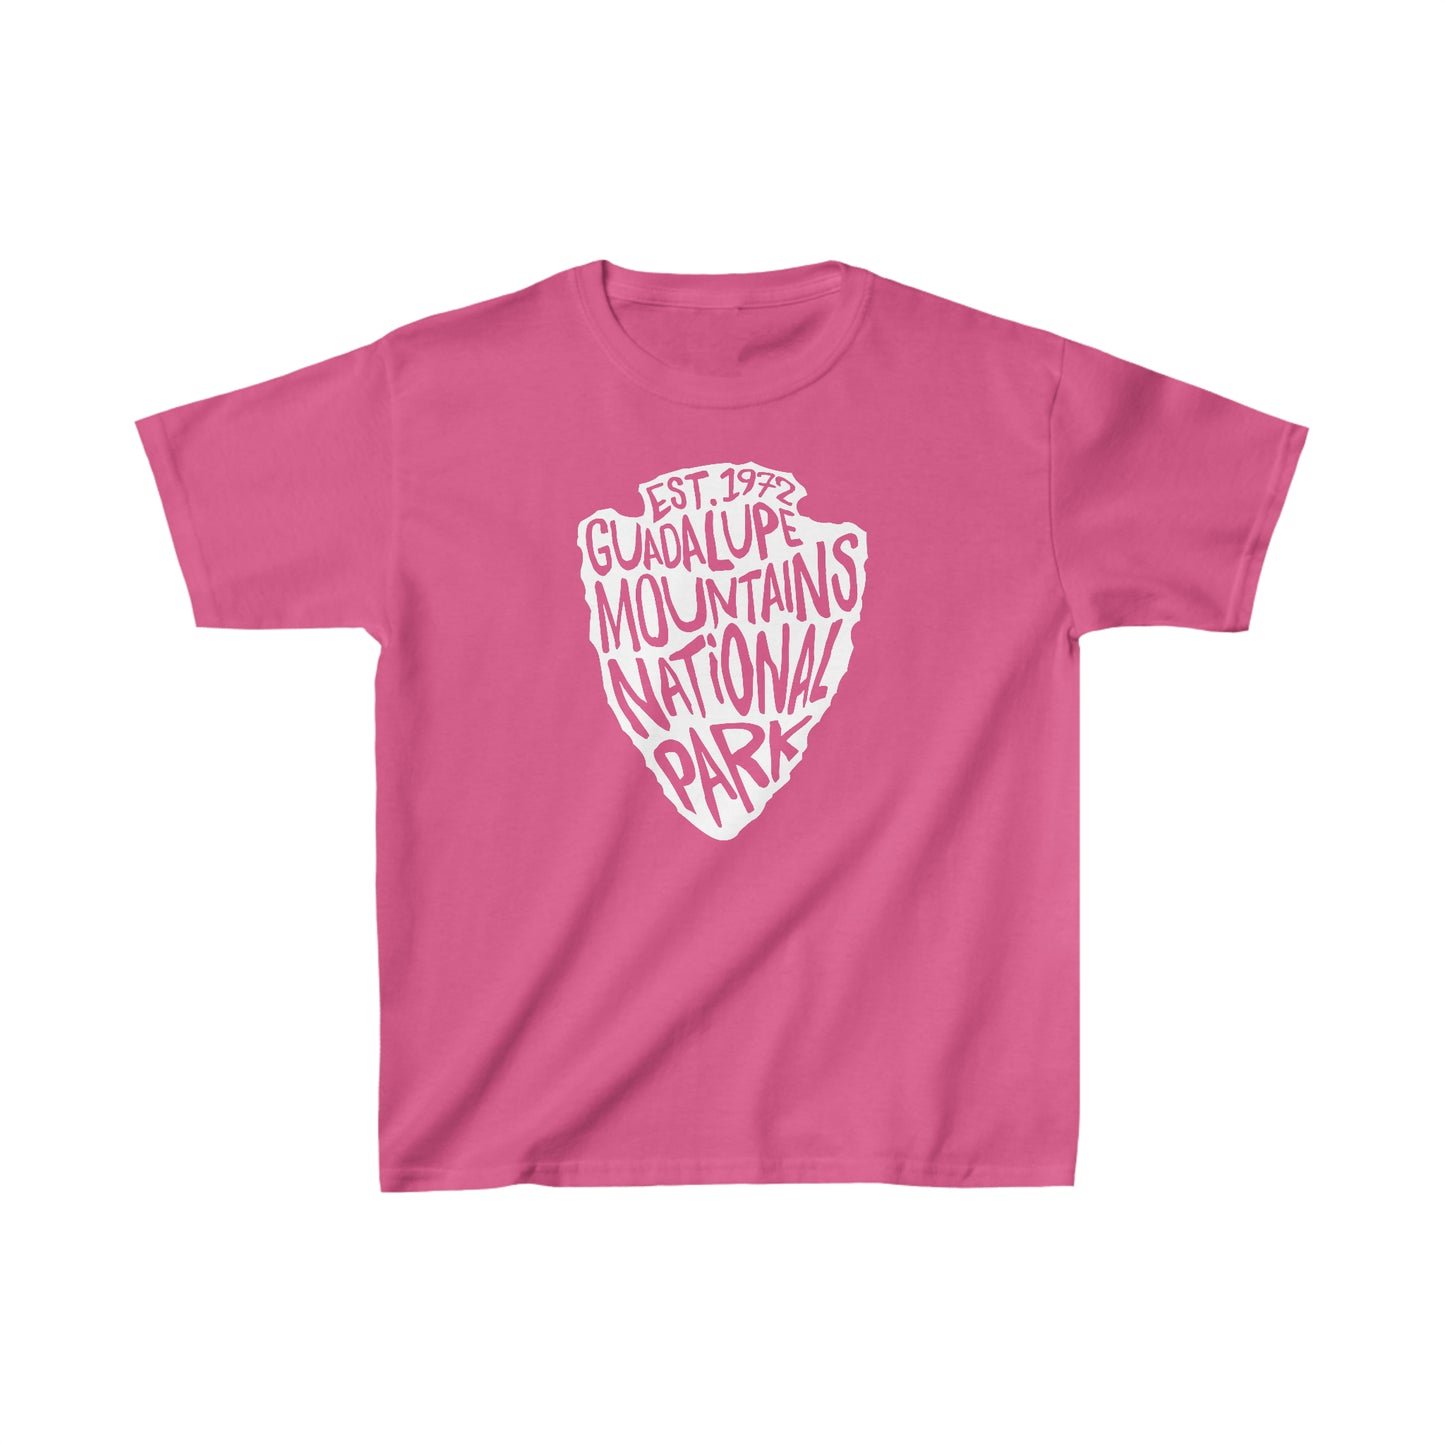 Guadalupe Mountains National Park Child T-Shirt - Arrowhead Design